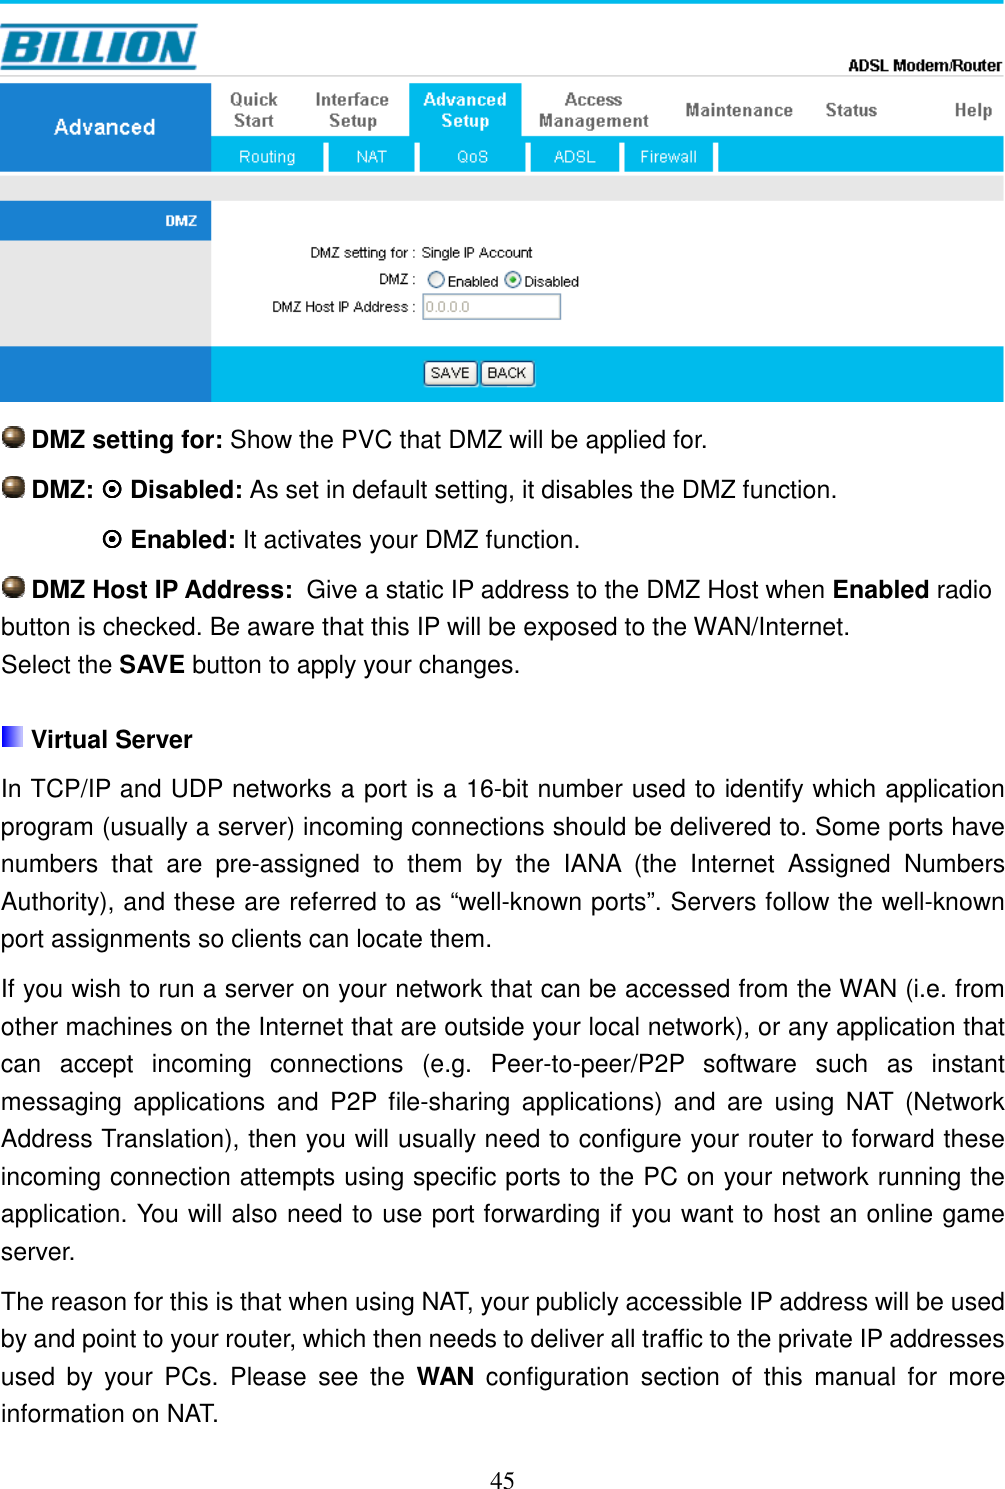 45   DMZ setting for: Show the PVC that DMZ will be applied for.  DMZ:  Disabled: As set in default setting, it disables the DMZ function.    Enabled: It activates your DMZ function.    DMZ Host IP Address:  Give a static IP address to the DMZ Host when Enabled radio button is checked. Be aware that this IP will be exposed to the WAN/Internet. Select the SAVE button to apply your changes.   Virtual Server In TCP/IP and UDP networks a port is a 16-bit number used to identify which application program (usually a server) incoming connections should be delivered to. Some ports have numbers  that  are  pre-assigned  to  them  by  the  IANA  (the  Internet  Assigned  Numbers Authority), and these are referred to as “well-known ports”. Servers follow the well-known port assignments so clients can locate them. If you wish to run a server on your network that can be accessed from the WAN (i.e. from other machines on the Internet that are outside your local network), or any application that can  accept  incoming  connections  (e.g.  Peer-to-peer/P2P  software  such  as  instant messaging  applications  and  P2P  file-sharing  applications)  and  are  using  NAT  (Network Address Translation), then you will usually need to configure your router to forward these incoming connection attempts using specific ports to the PC on your network running the application. You will also need to use port forwarding if you want to host an online game server. The reason for this is that when using NAT, your publicly accessible IP address will be used by and point to your router, which then needs to deliver all traffic to the private IP addresses used  by  your  PCs.  Please  see  the  WAN  configuration  section  of  this  manual  for  more information on NAT. 